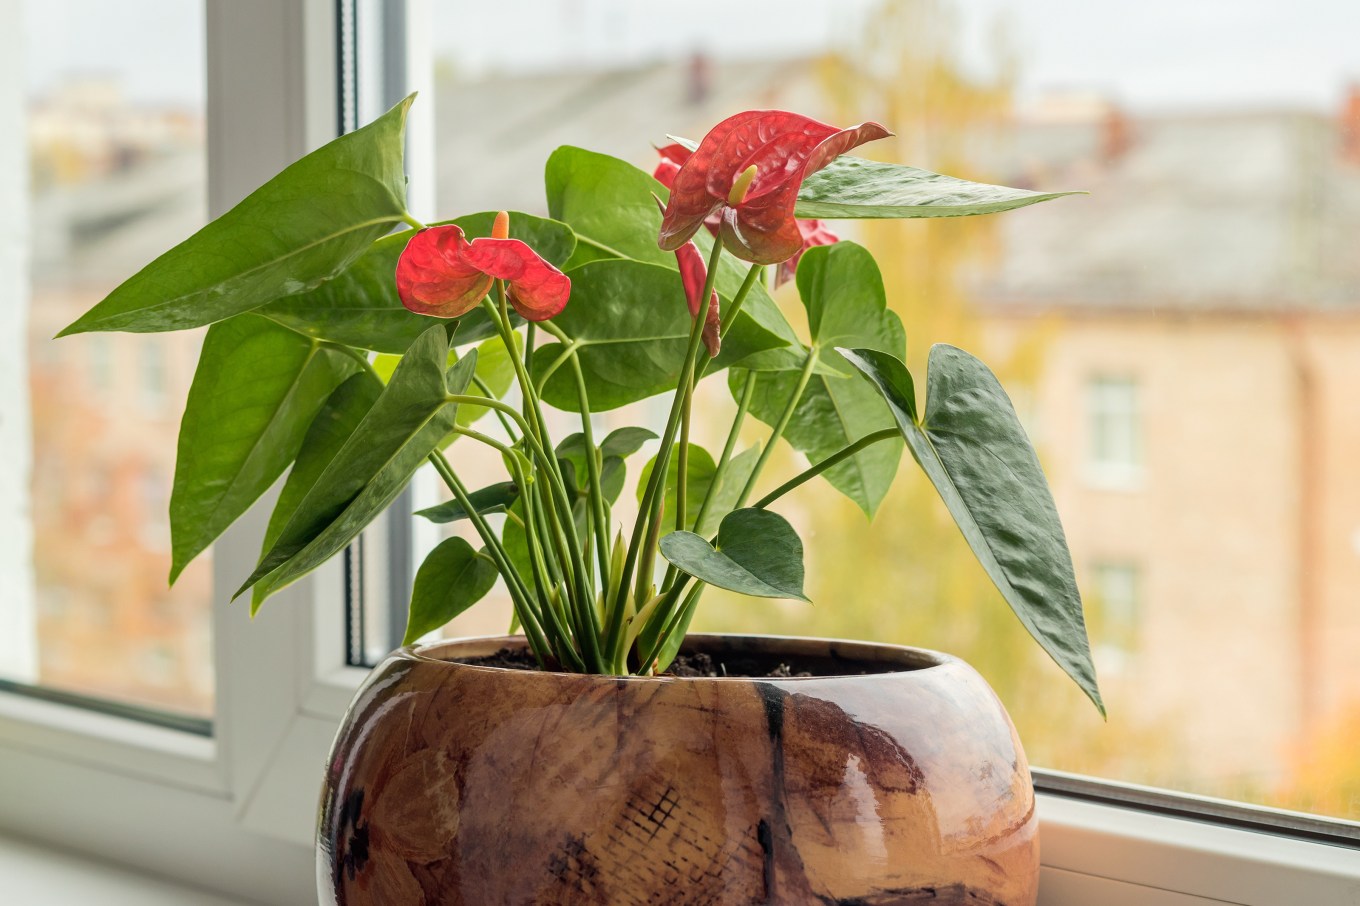 An Anthurium plant that's perennially featured in homes near the window in the room.